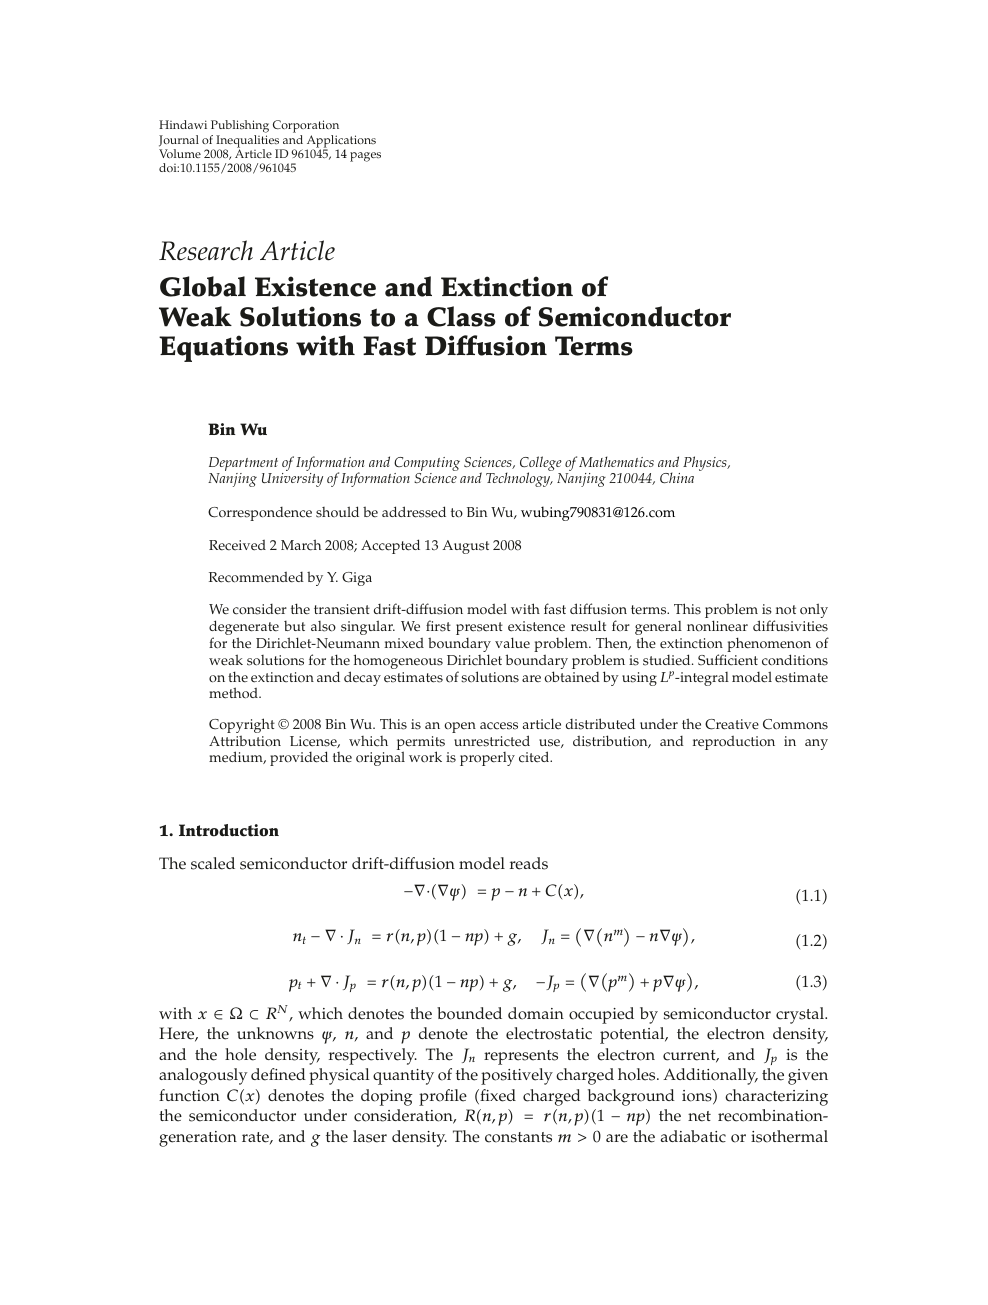 Global Existence And Extinction Of Weak Solutions To A Class Of Semiconductor Equations With Fast Diffusion Terms Topic Of Research Paper In Mathematics Download Scholarly Article Pdf And Read For Free